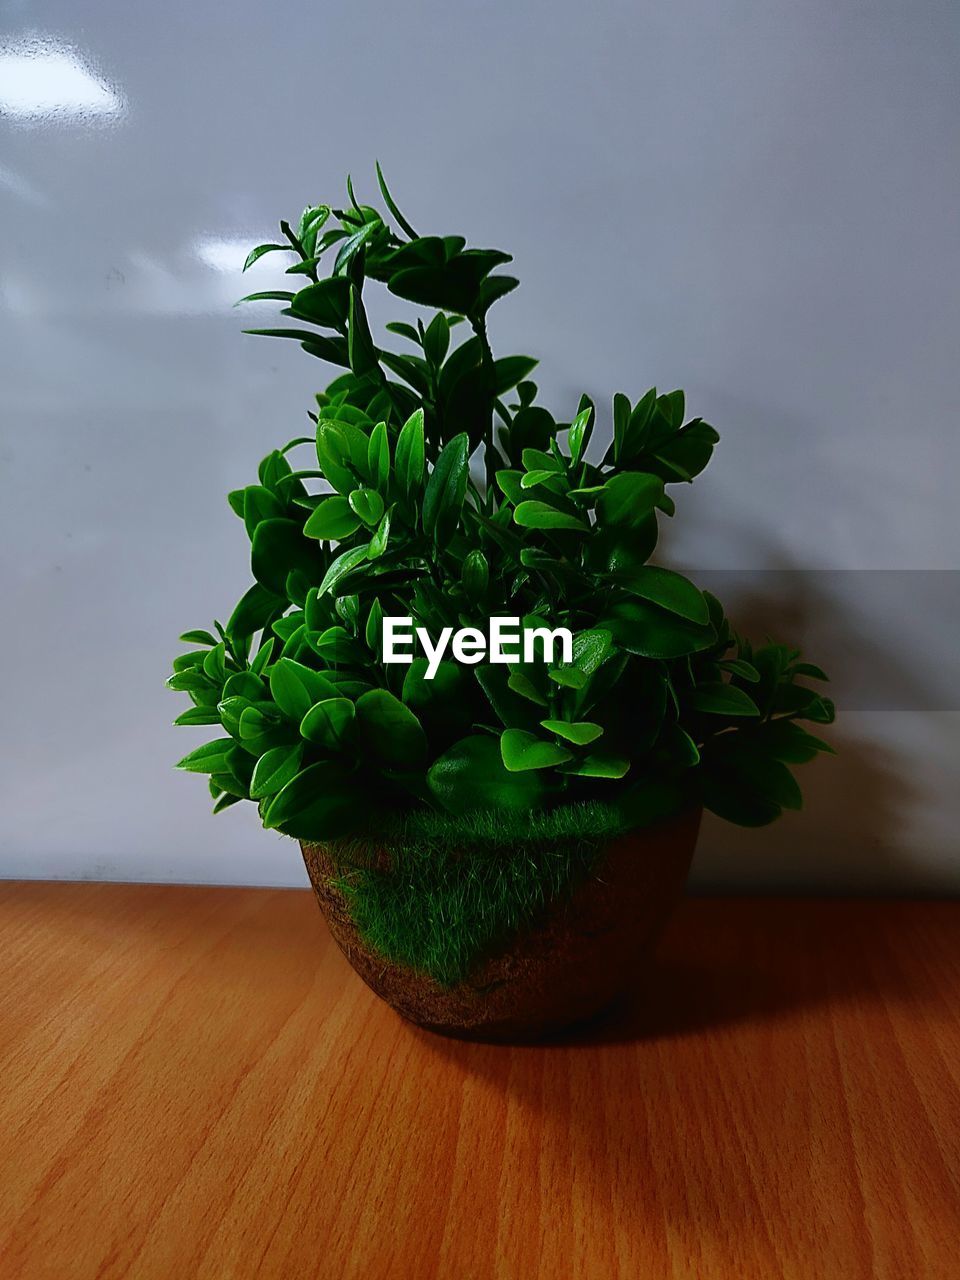 CLOSE-UP OF POTTED PLANT ON TABLE